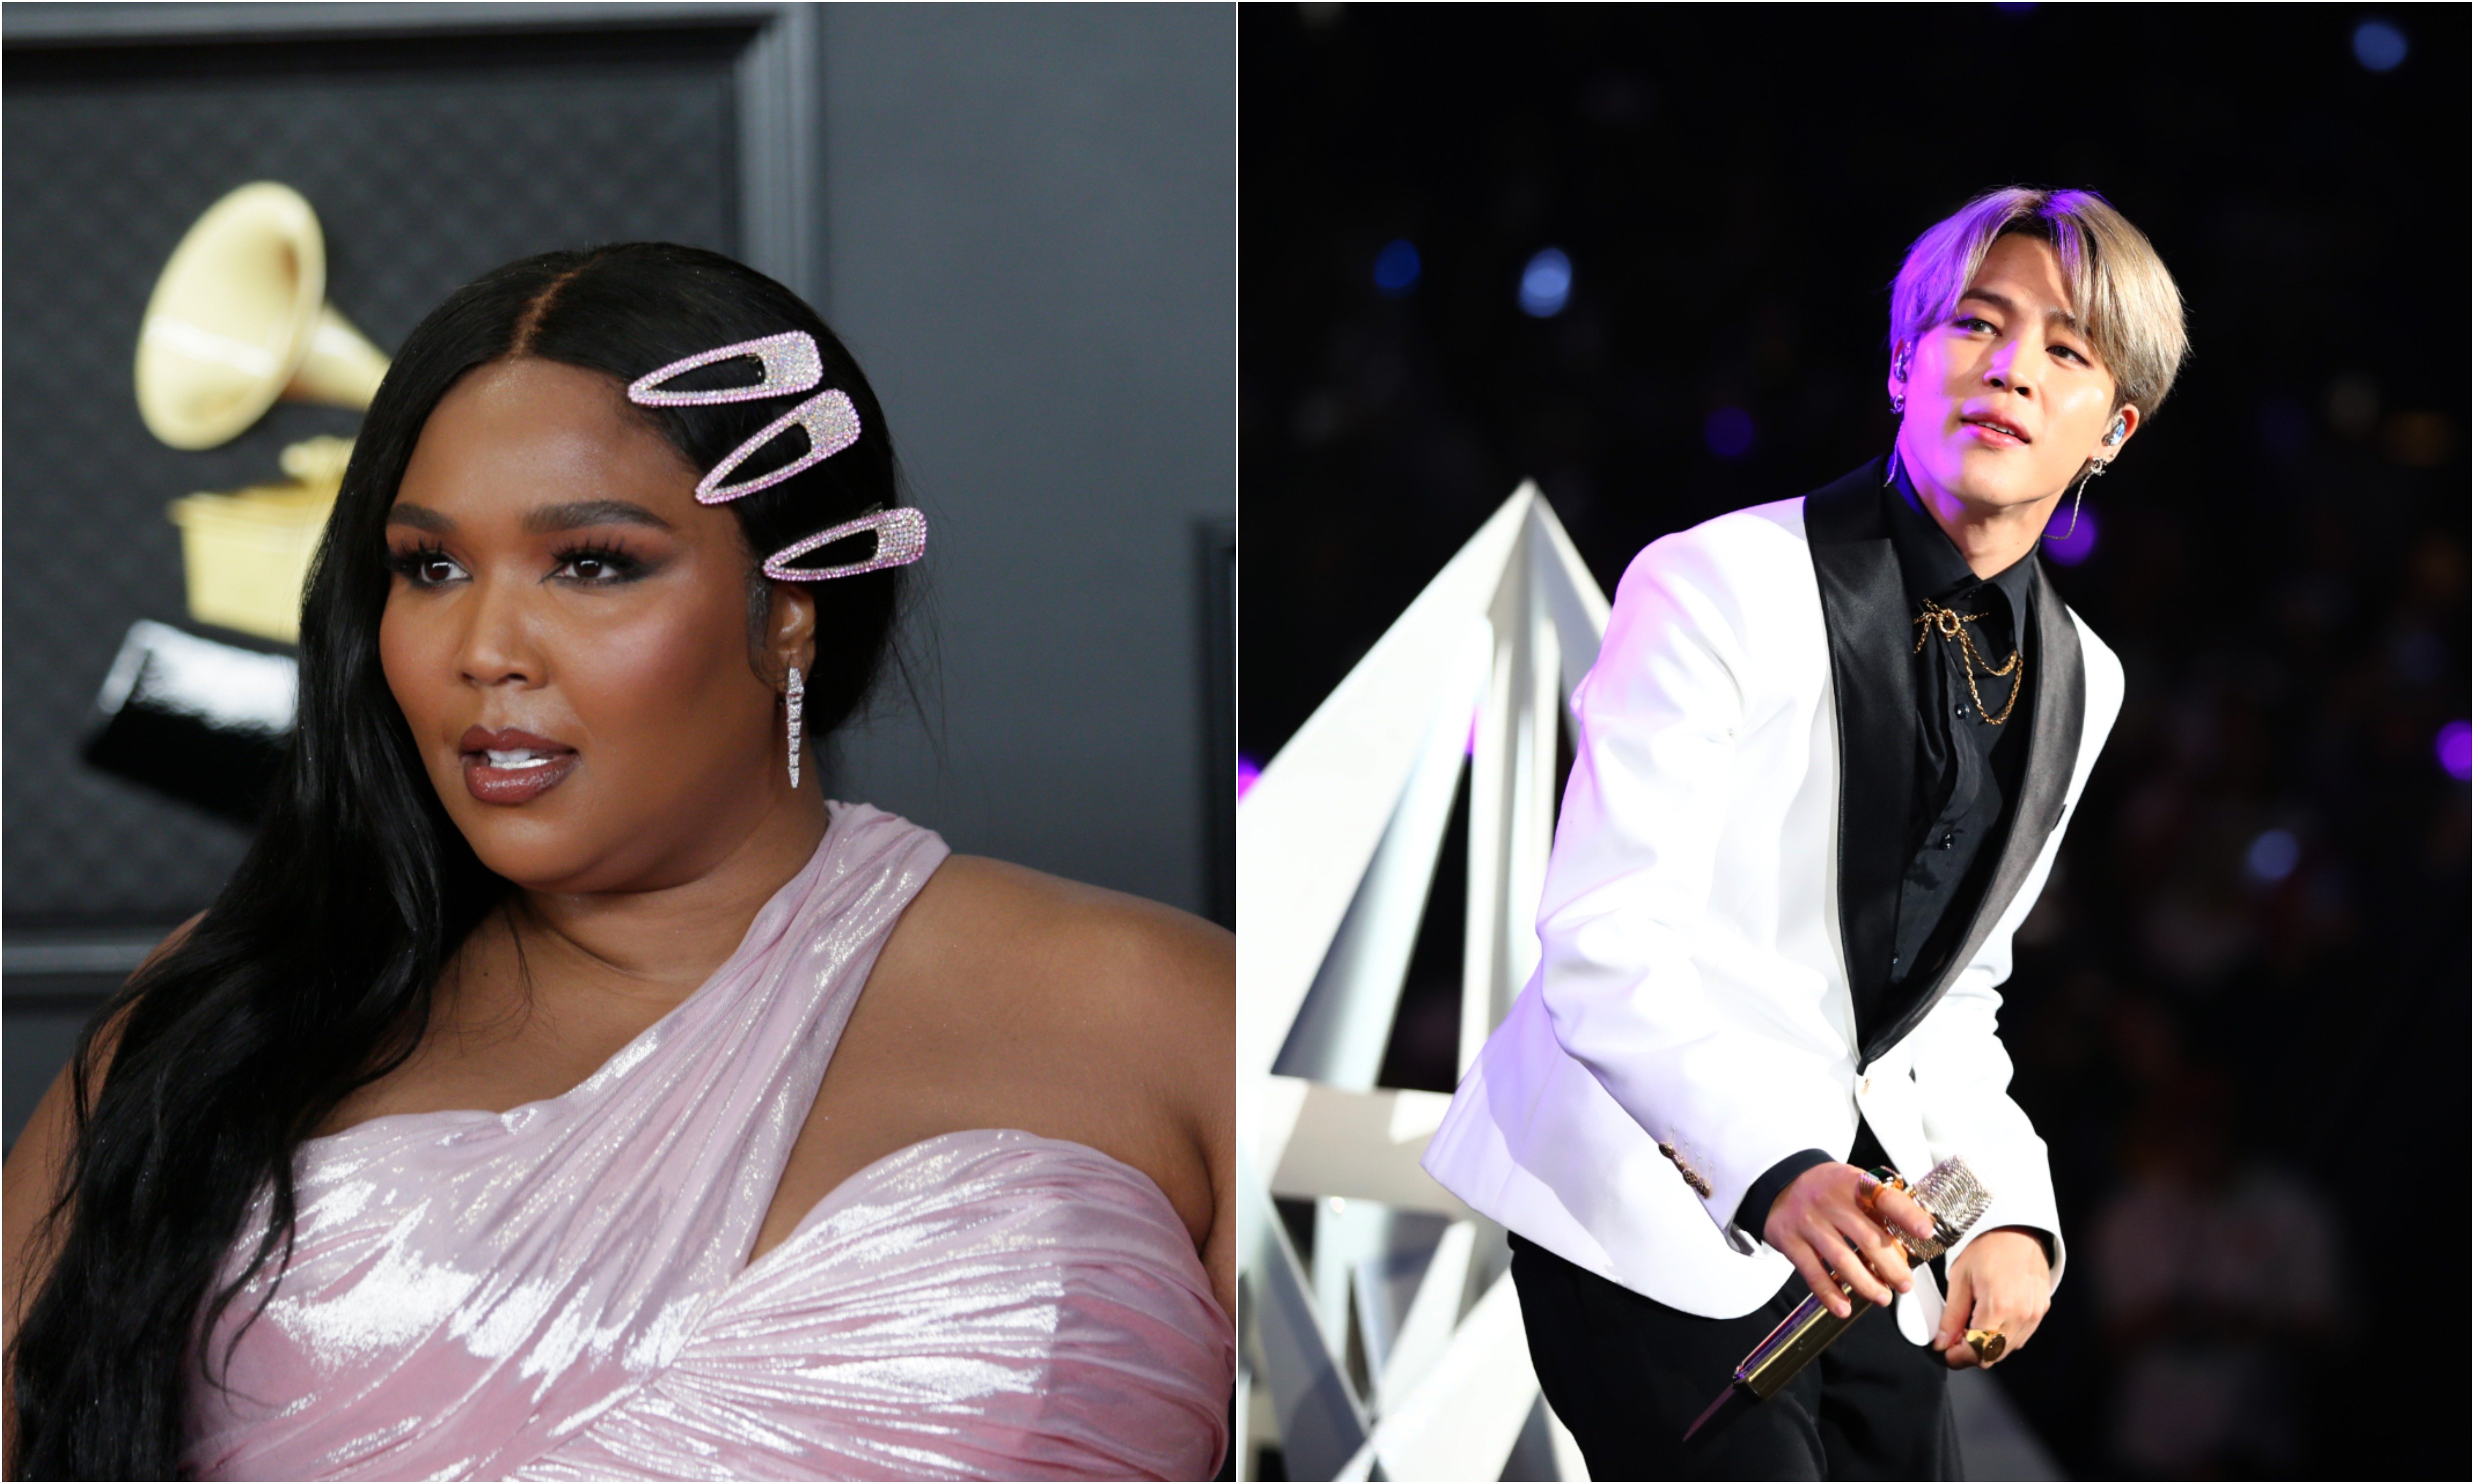 A joined photo of Lizzo attending the 2021 Grammy awards and Jimin of BTS performing at 102.7 KIIS FM's Jingle Ball 2019